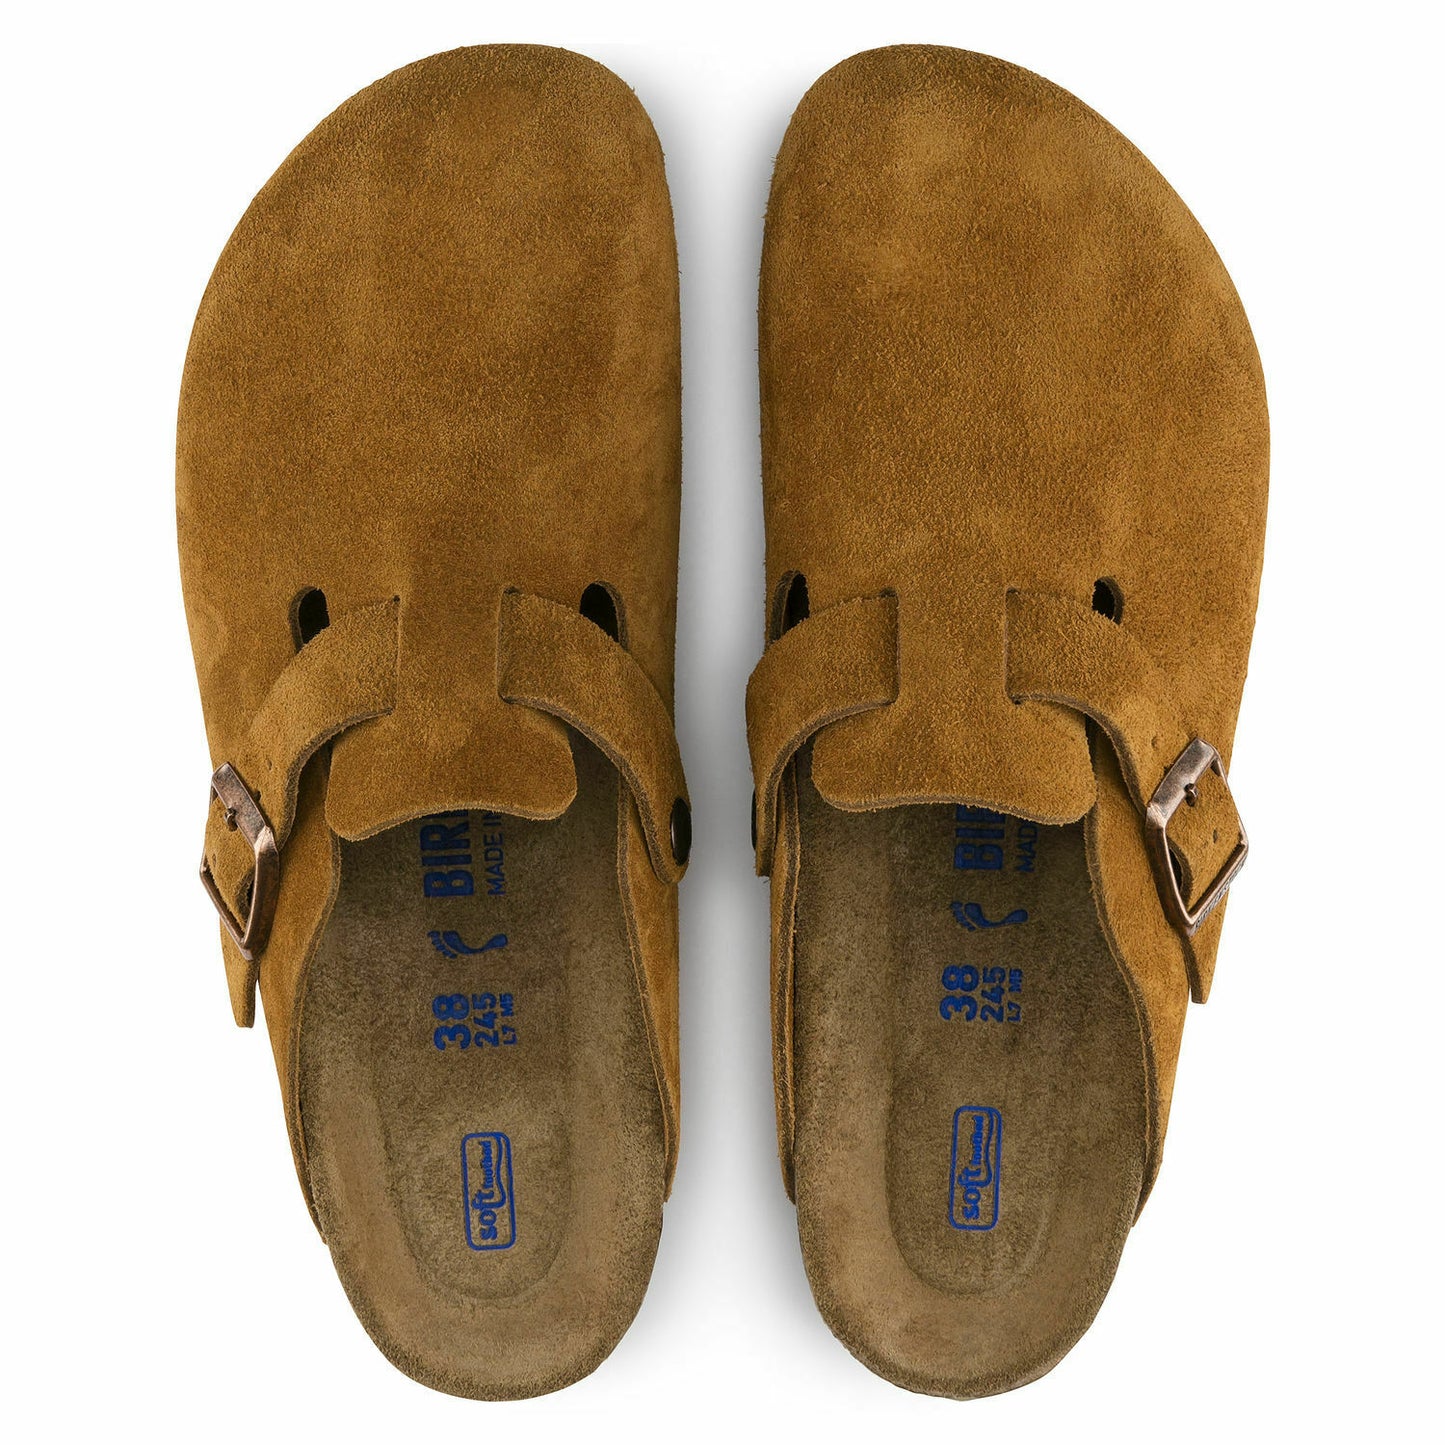 Birkenstock Boston Mink Suede SoftFootbed Womens - All Mixed Up 